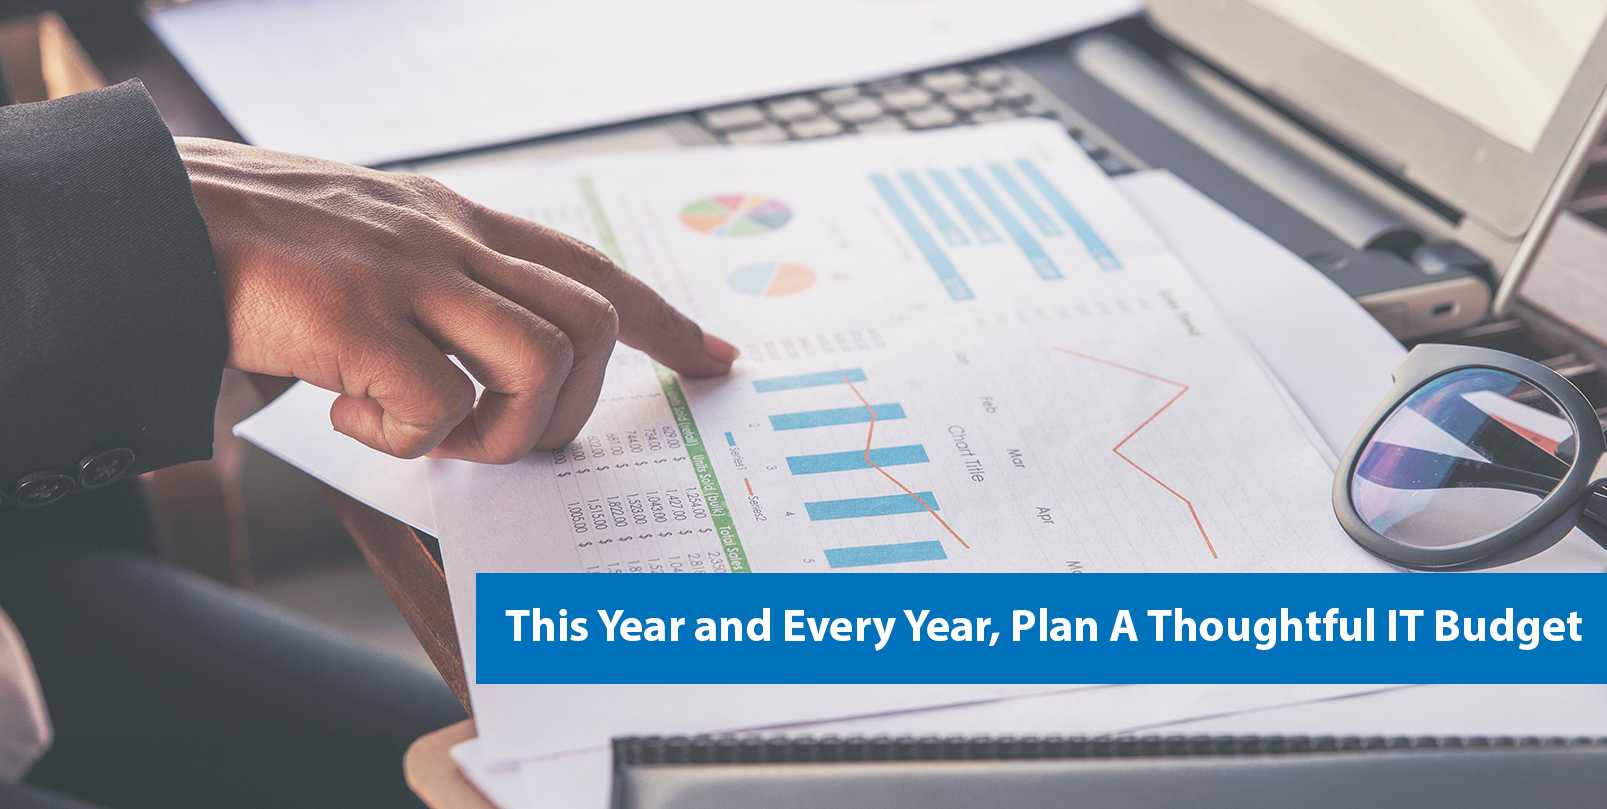 This year and every year, plan thoughtful IT budget